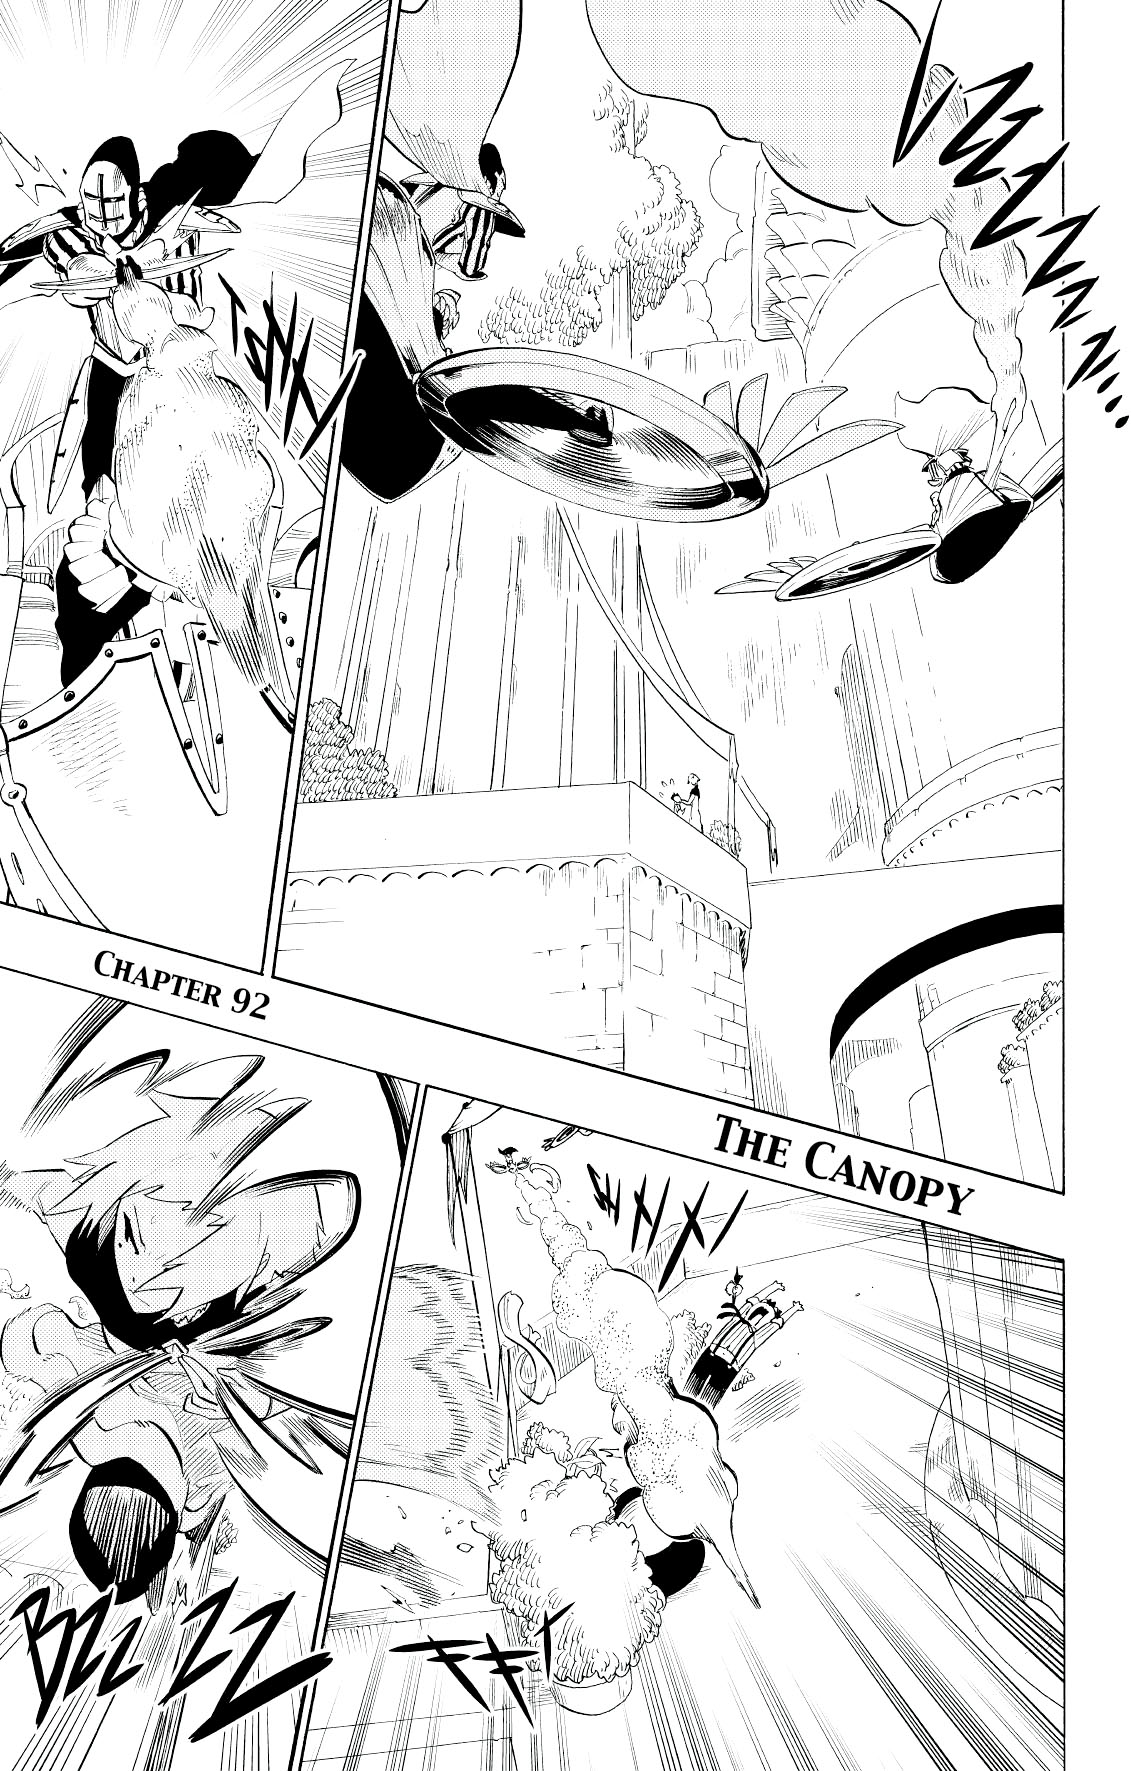 Radiant Vol. 12 Ch. 92 The Canopy